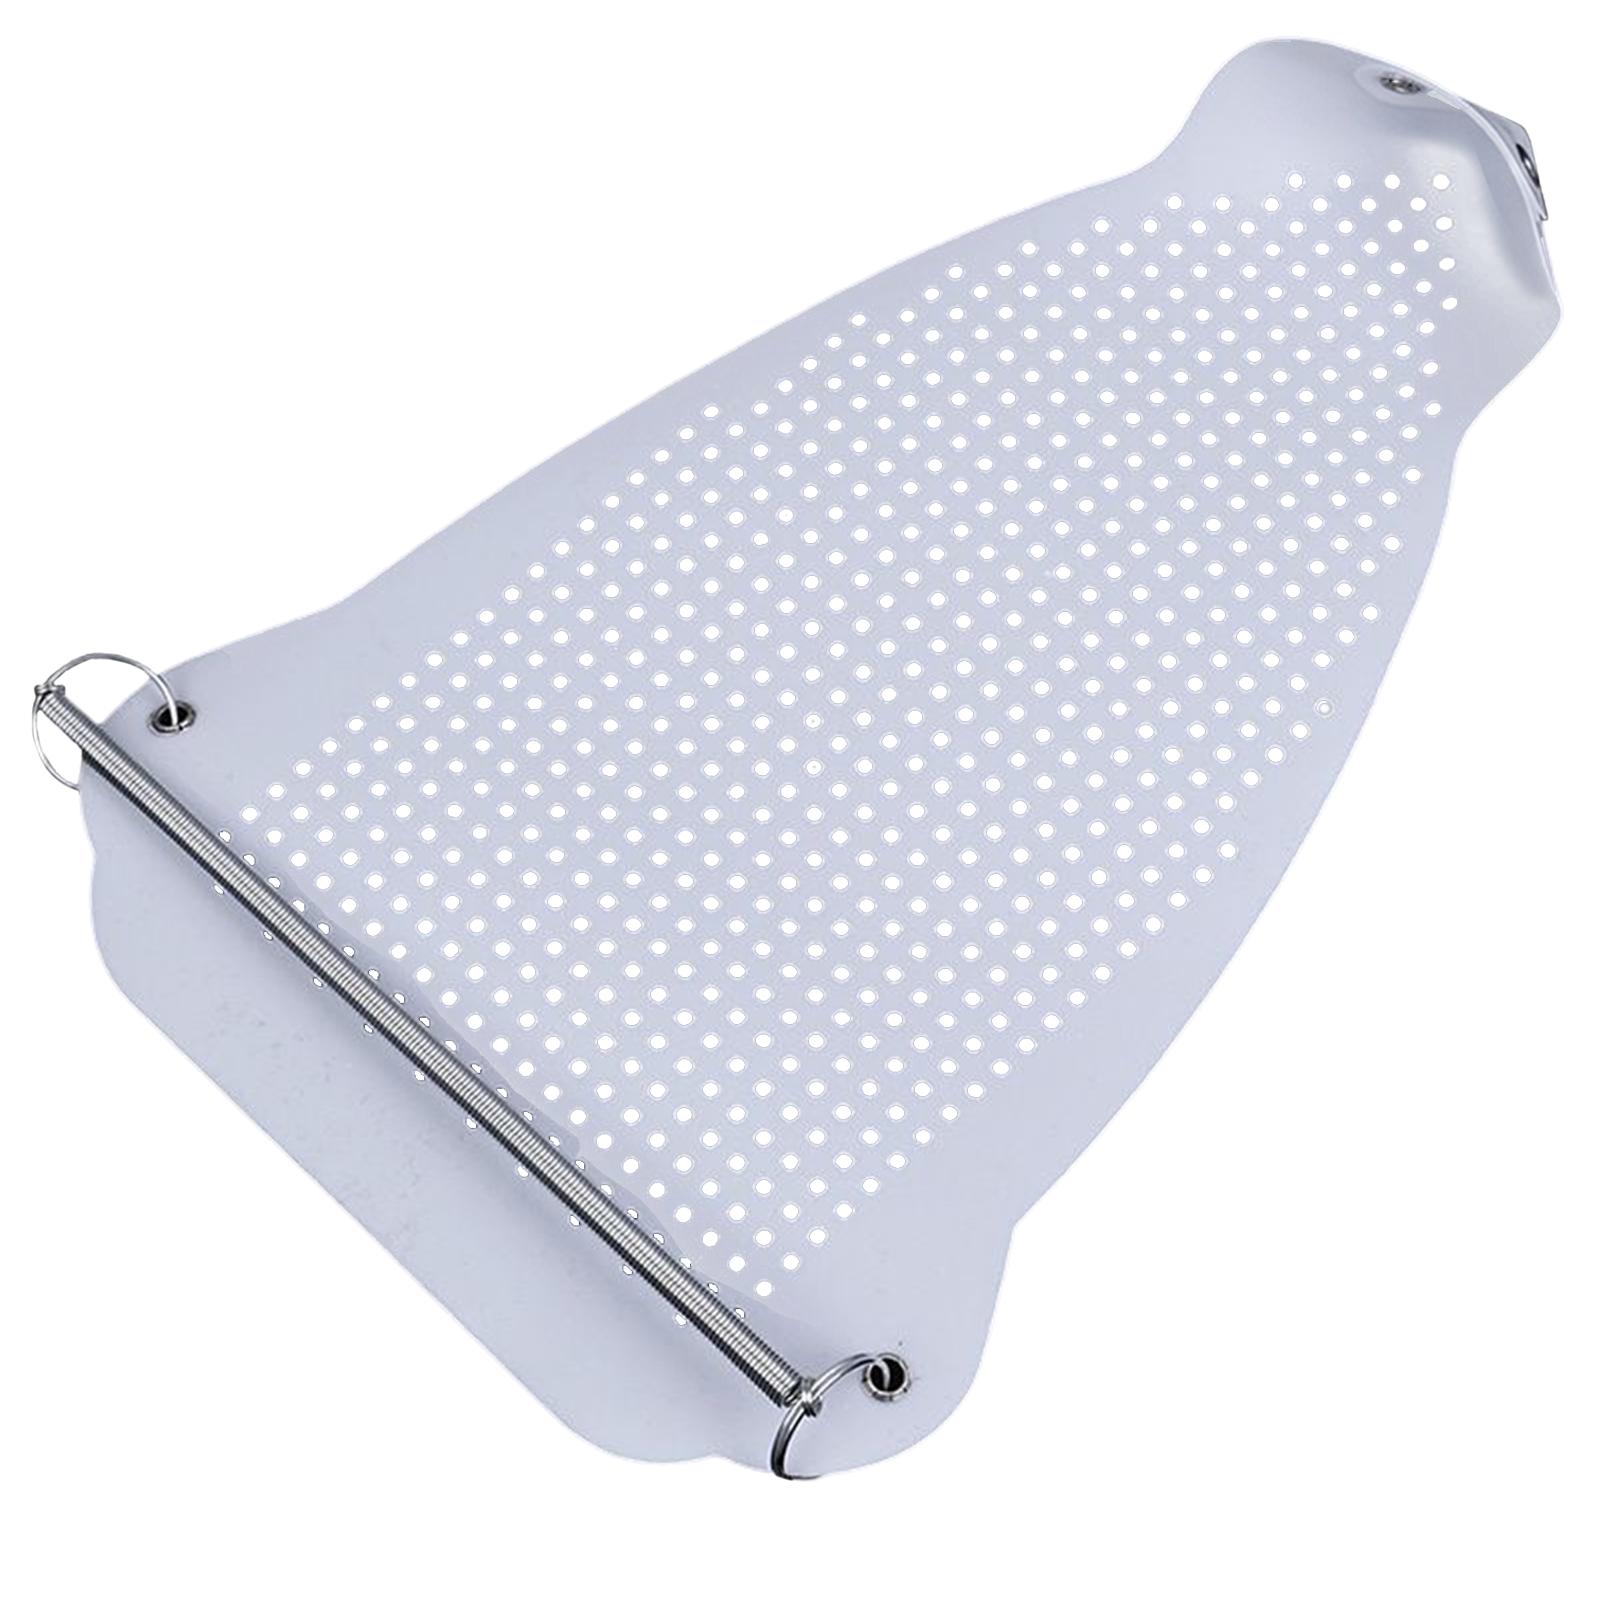 Iron Shoe Cover Ironing Accessories Iron Auxiliary Tool Soleplate